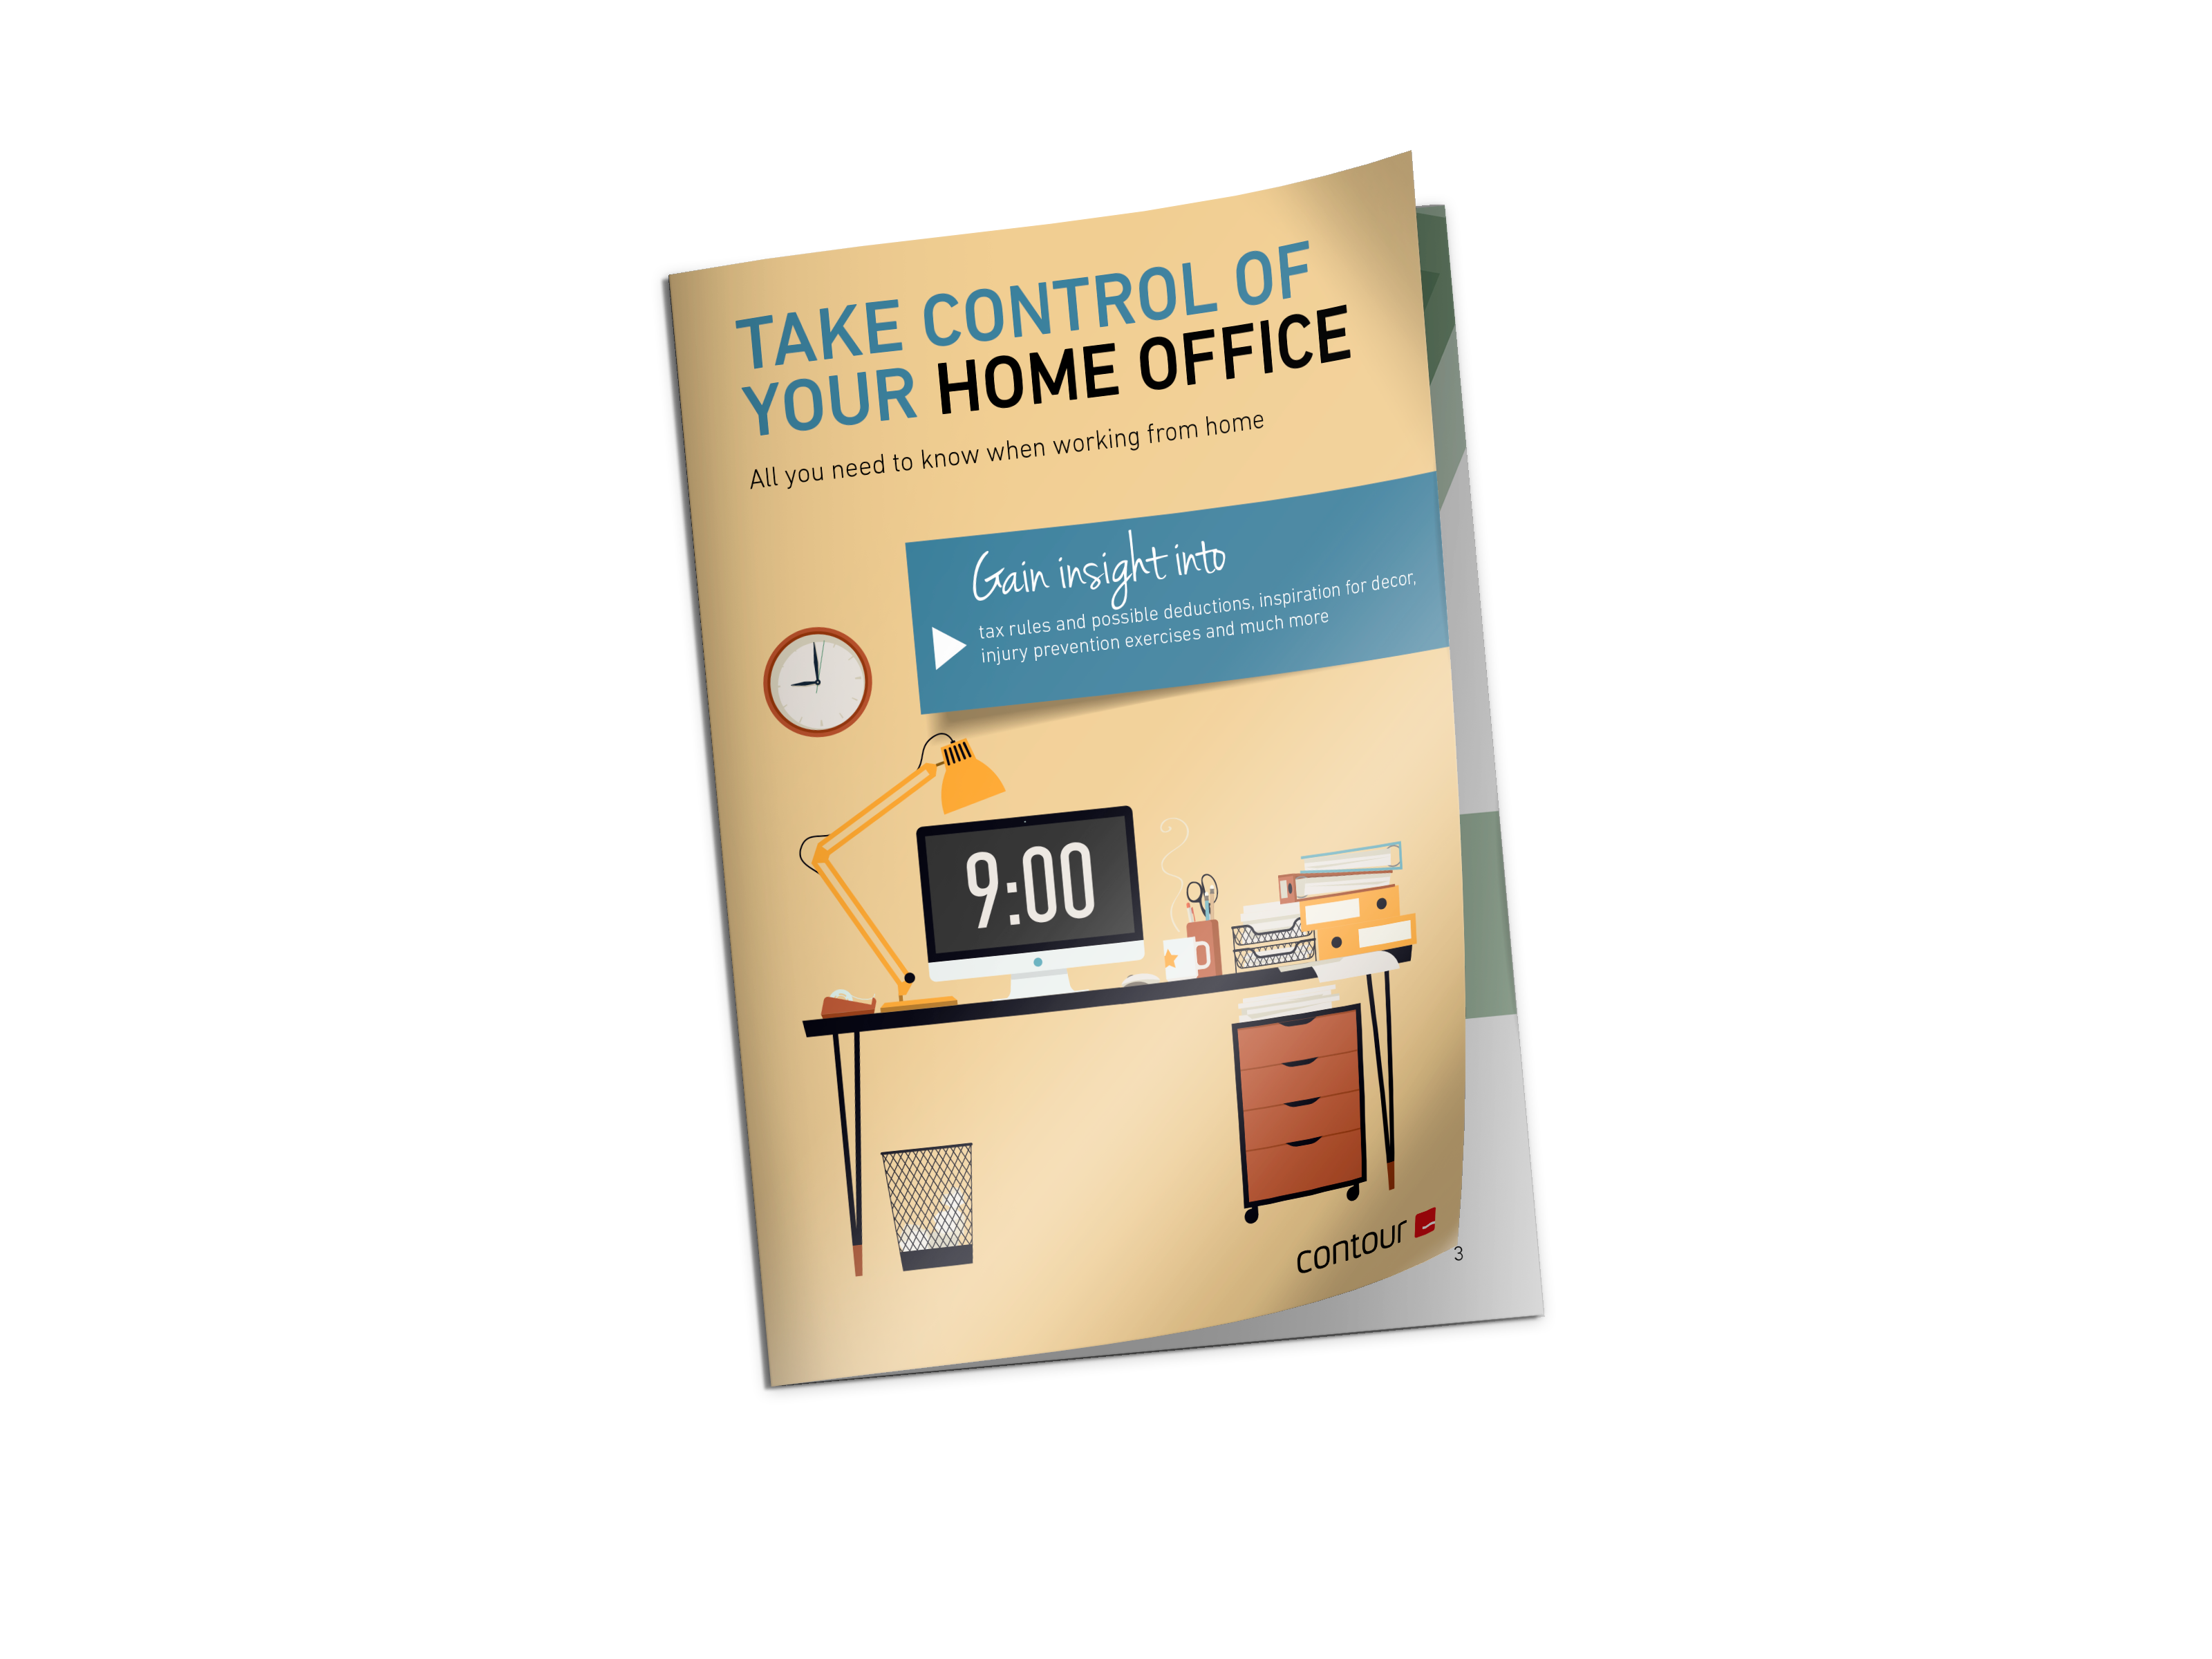 UK - Home Office Guide - frontpage Mock up